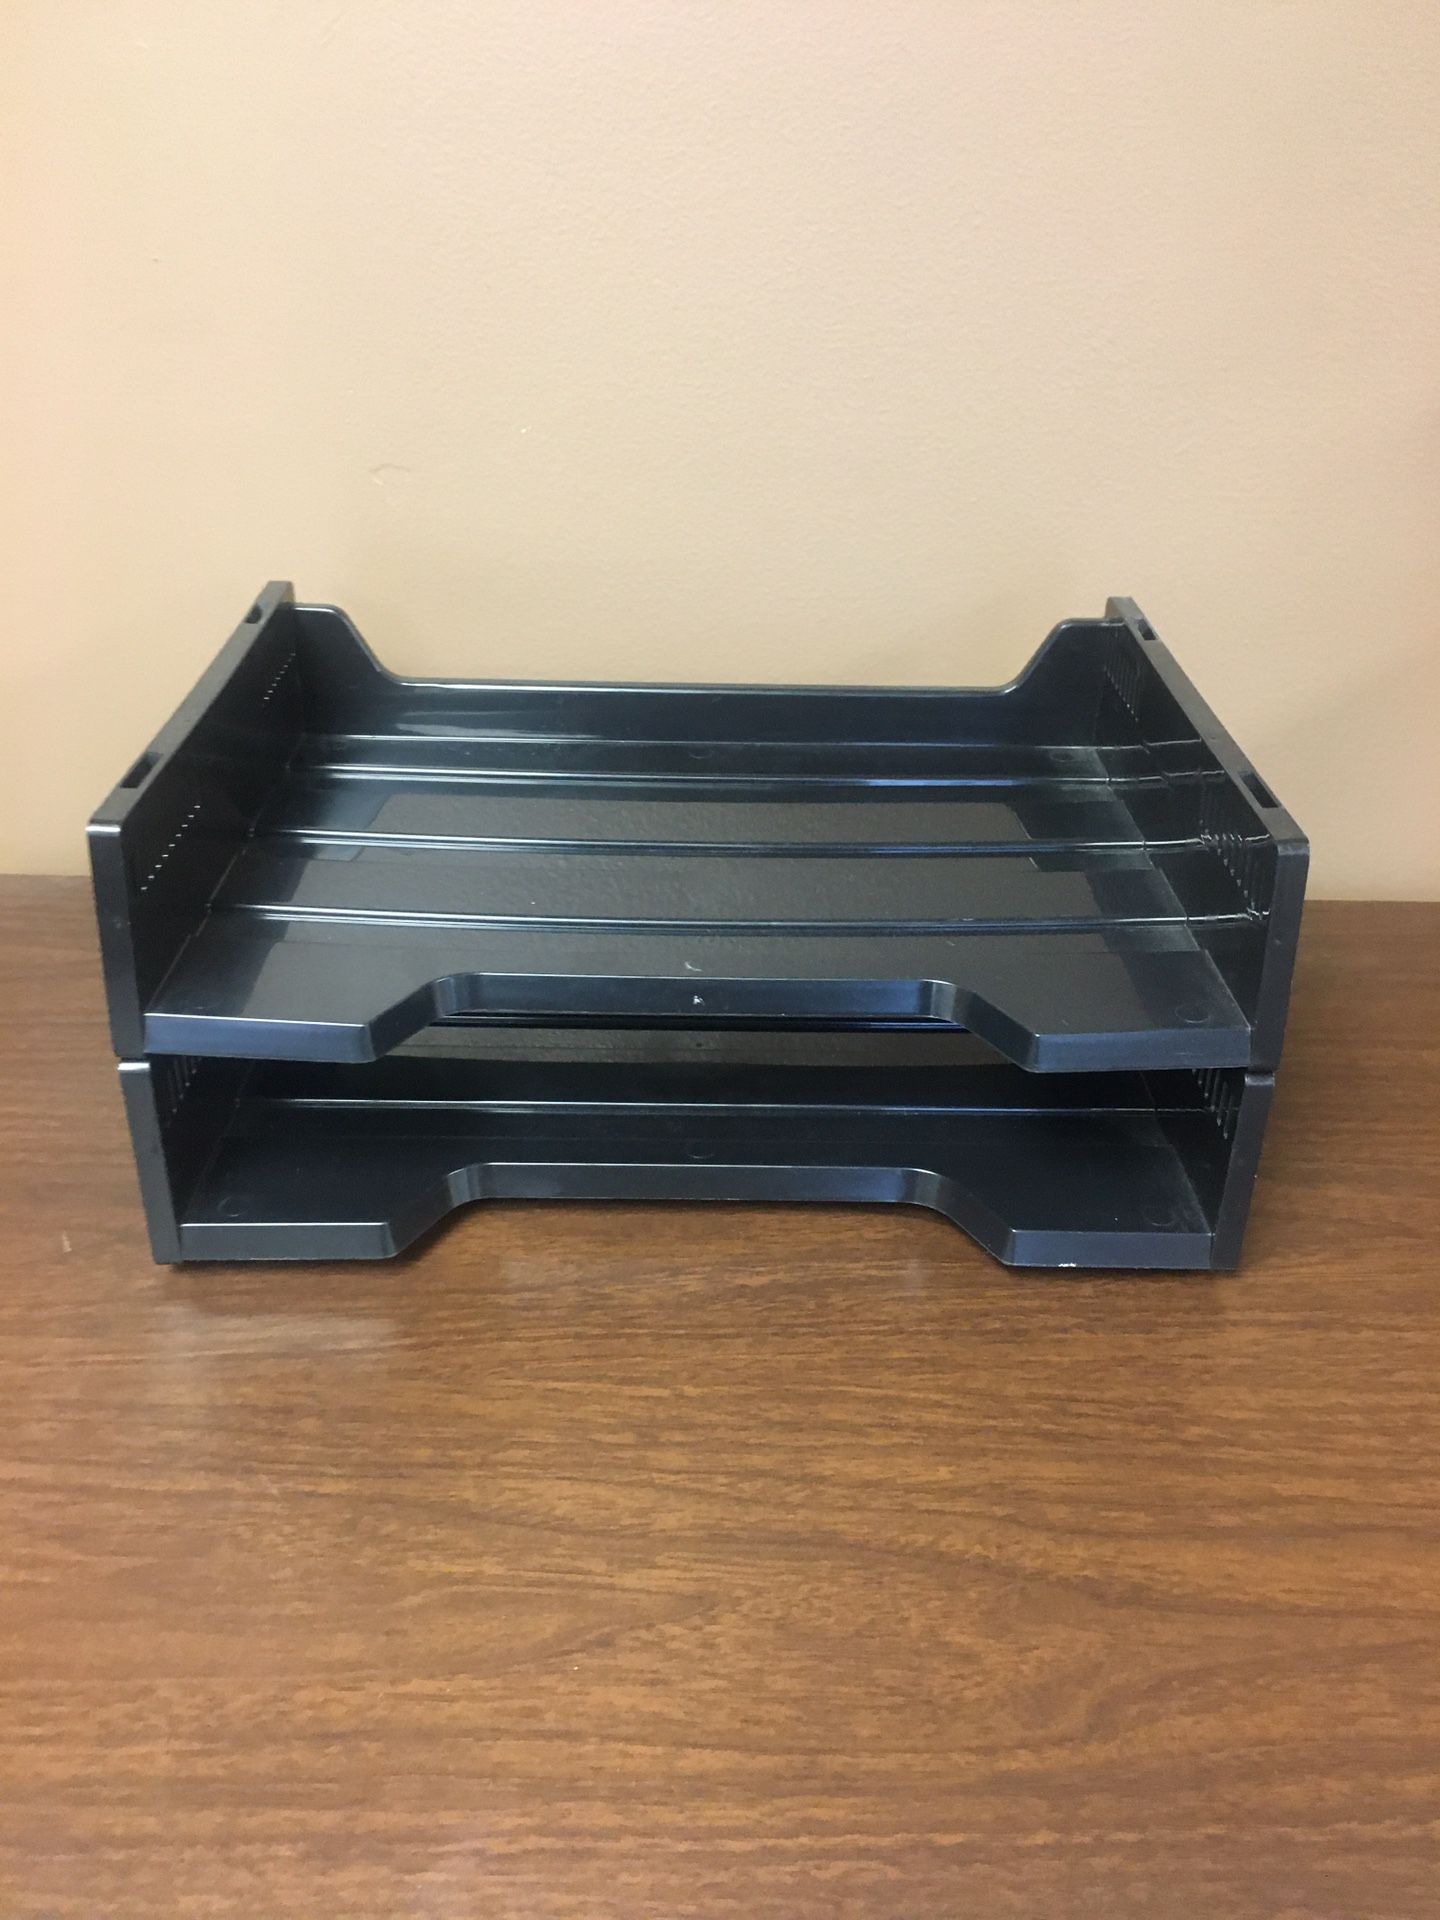 2 Black Plastic Filing Trays for the Office